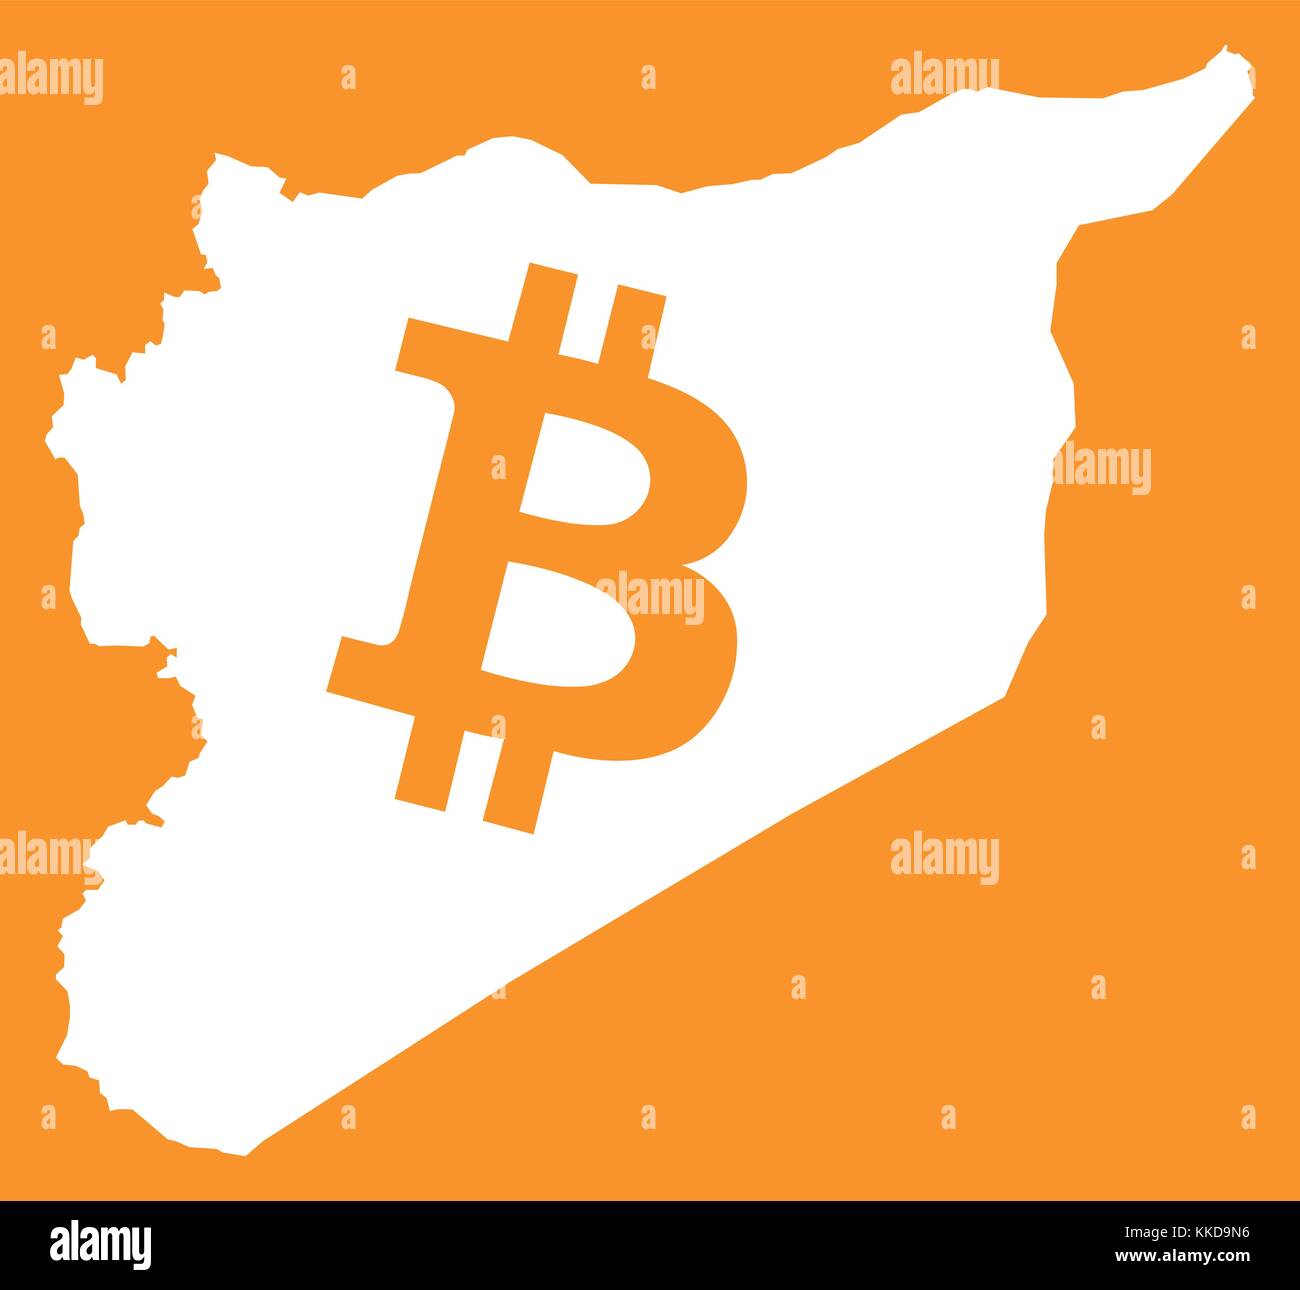 Syria map with bitcoin crypto currency symbol illustration Stock Vector